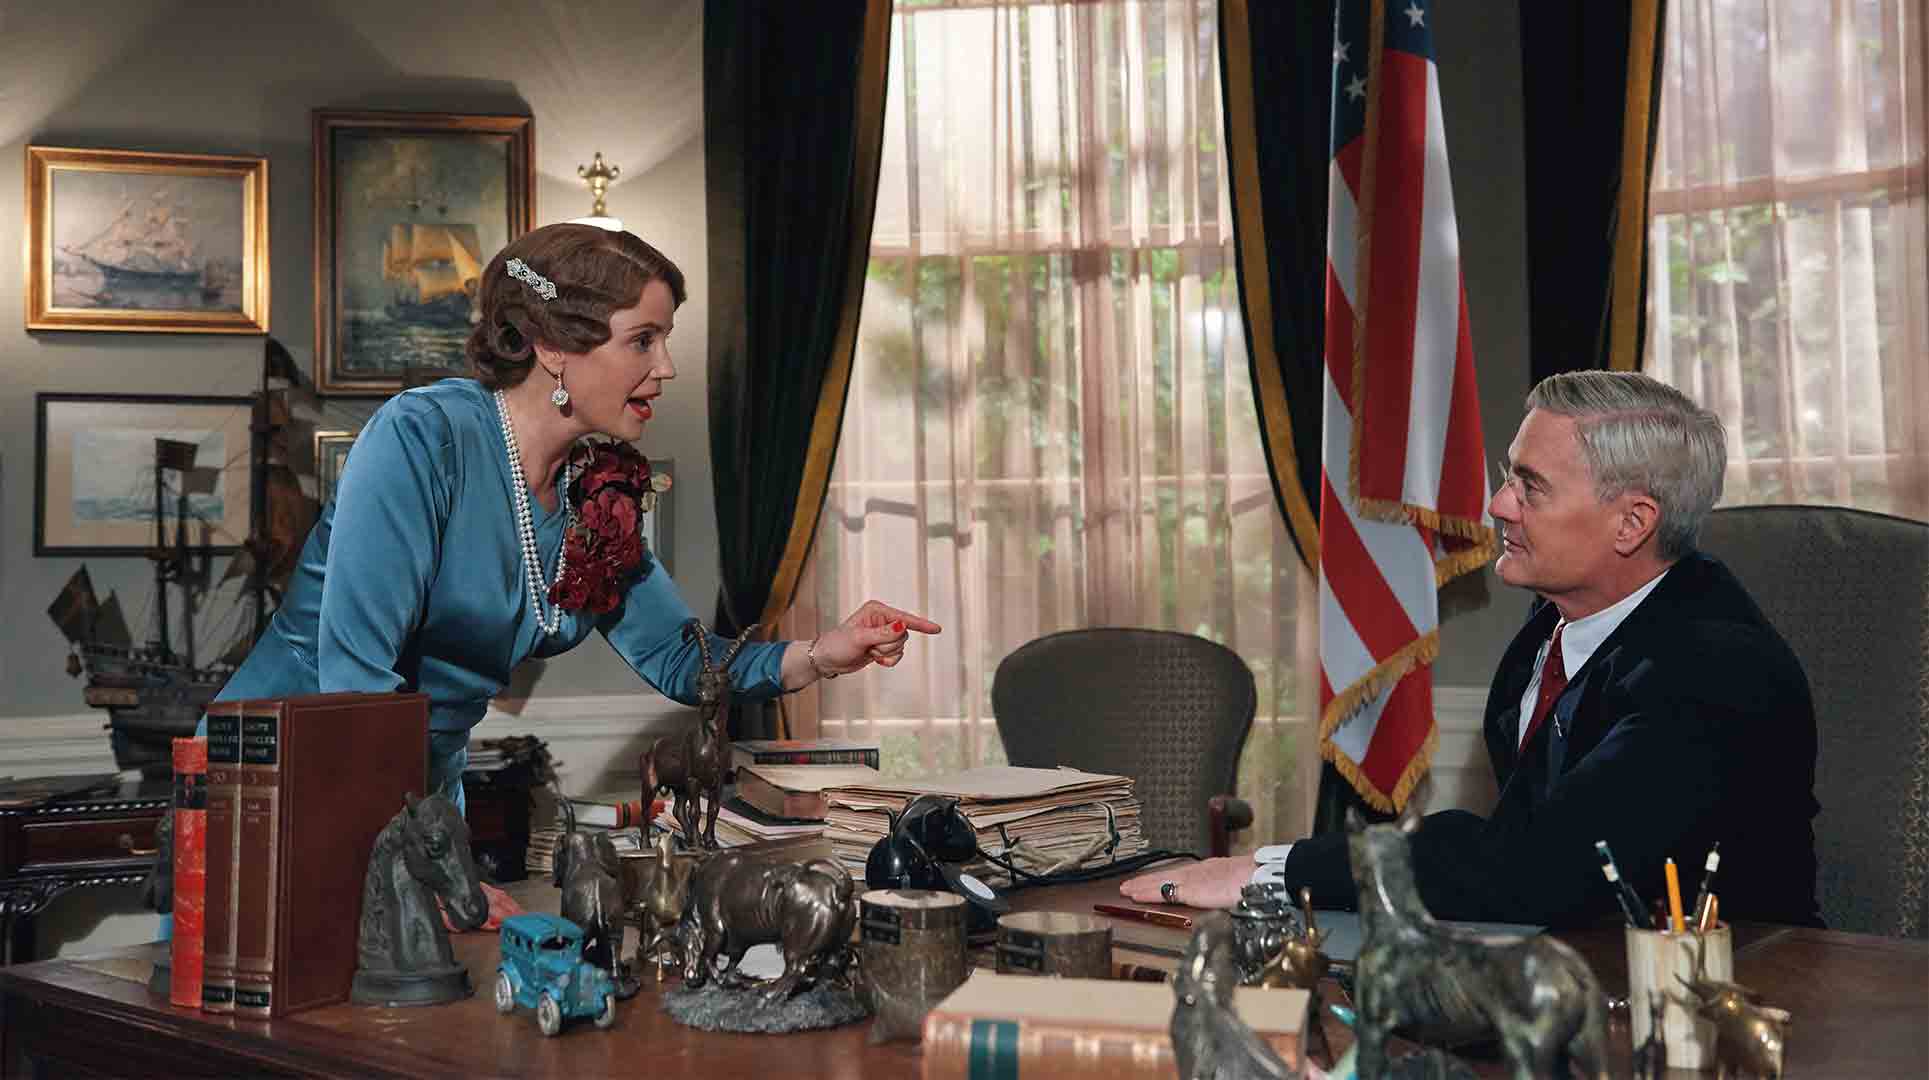 Shown from left to right: Sofia Helin as Crown Princess Martha and Kyle MacLachlan as President Franklin D. Roosevelt